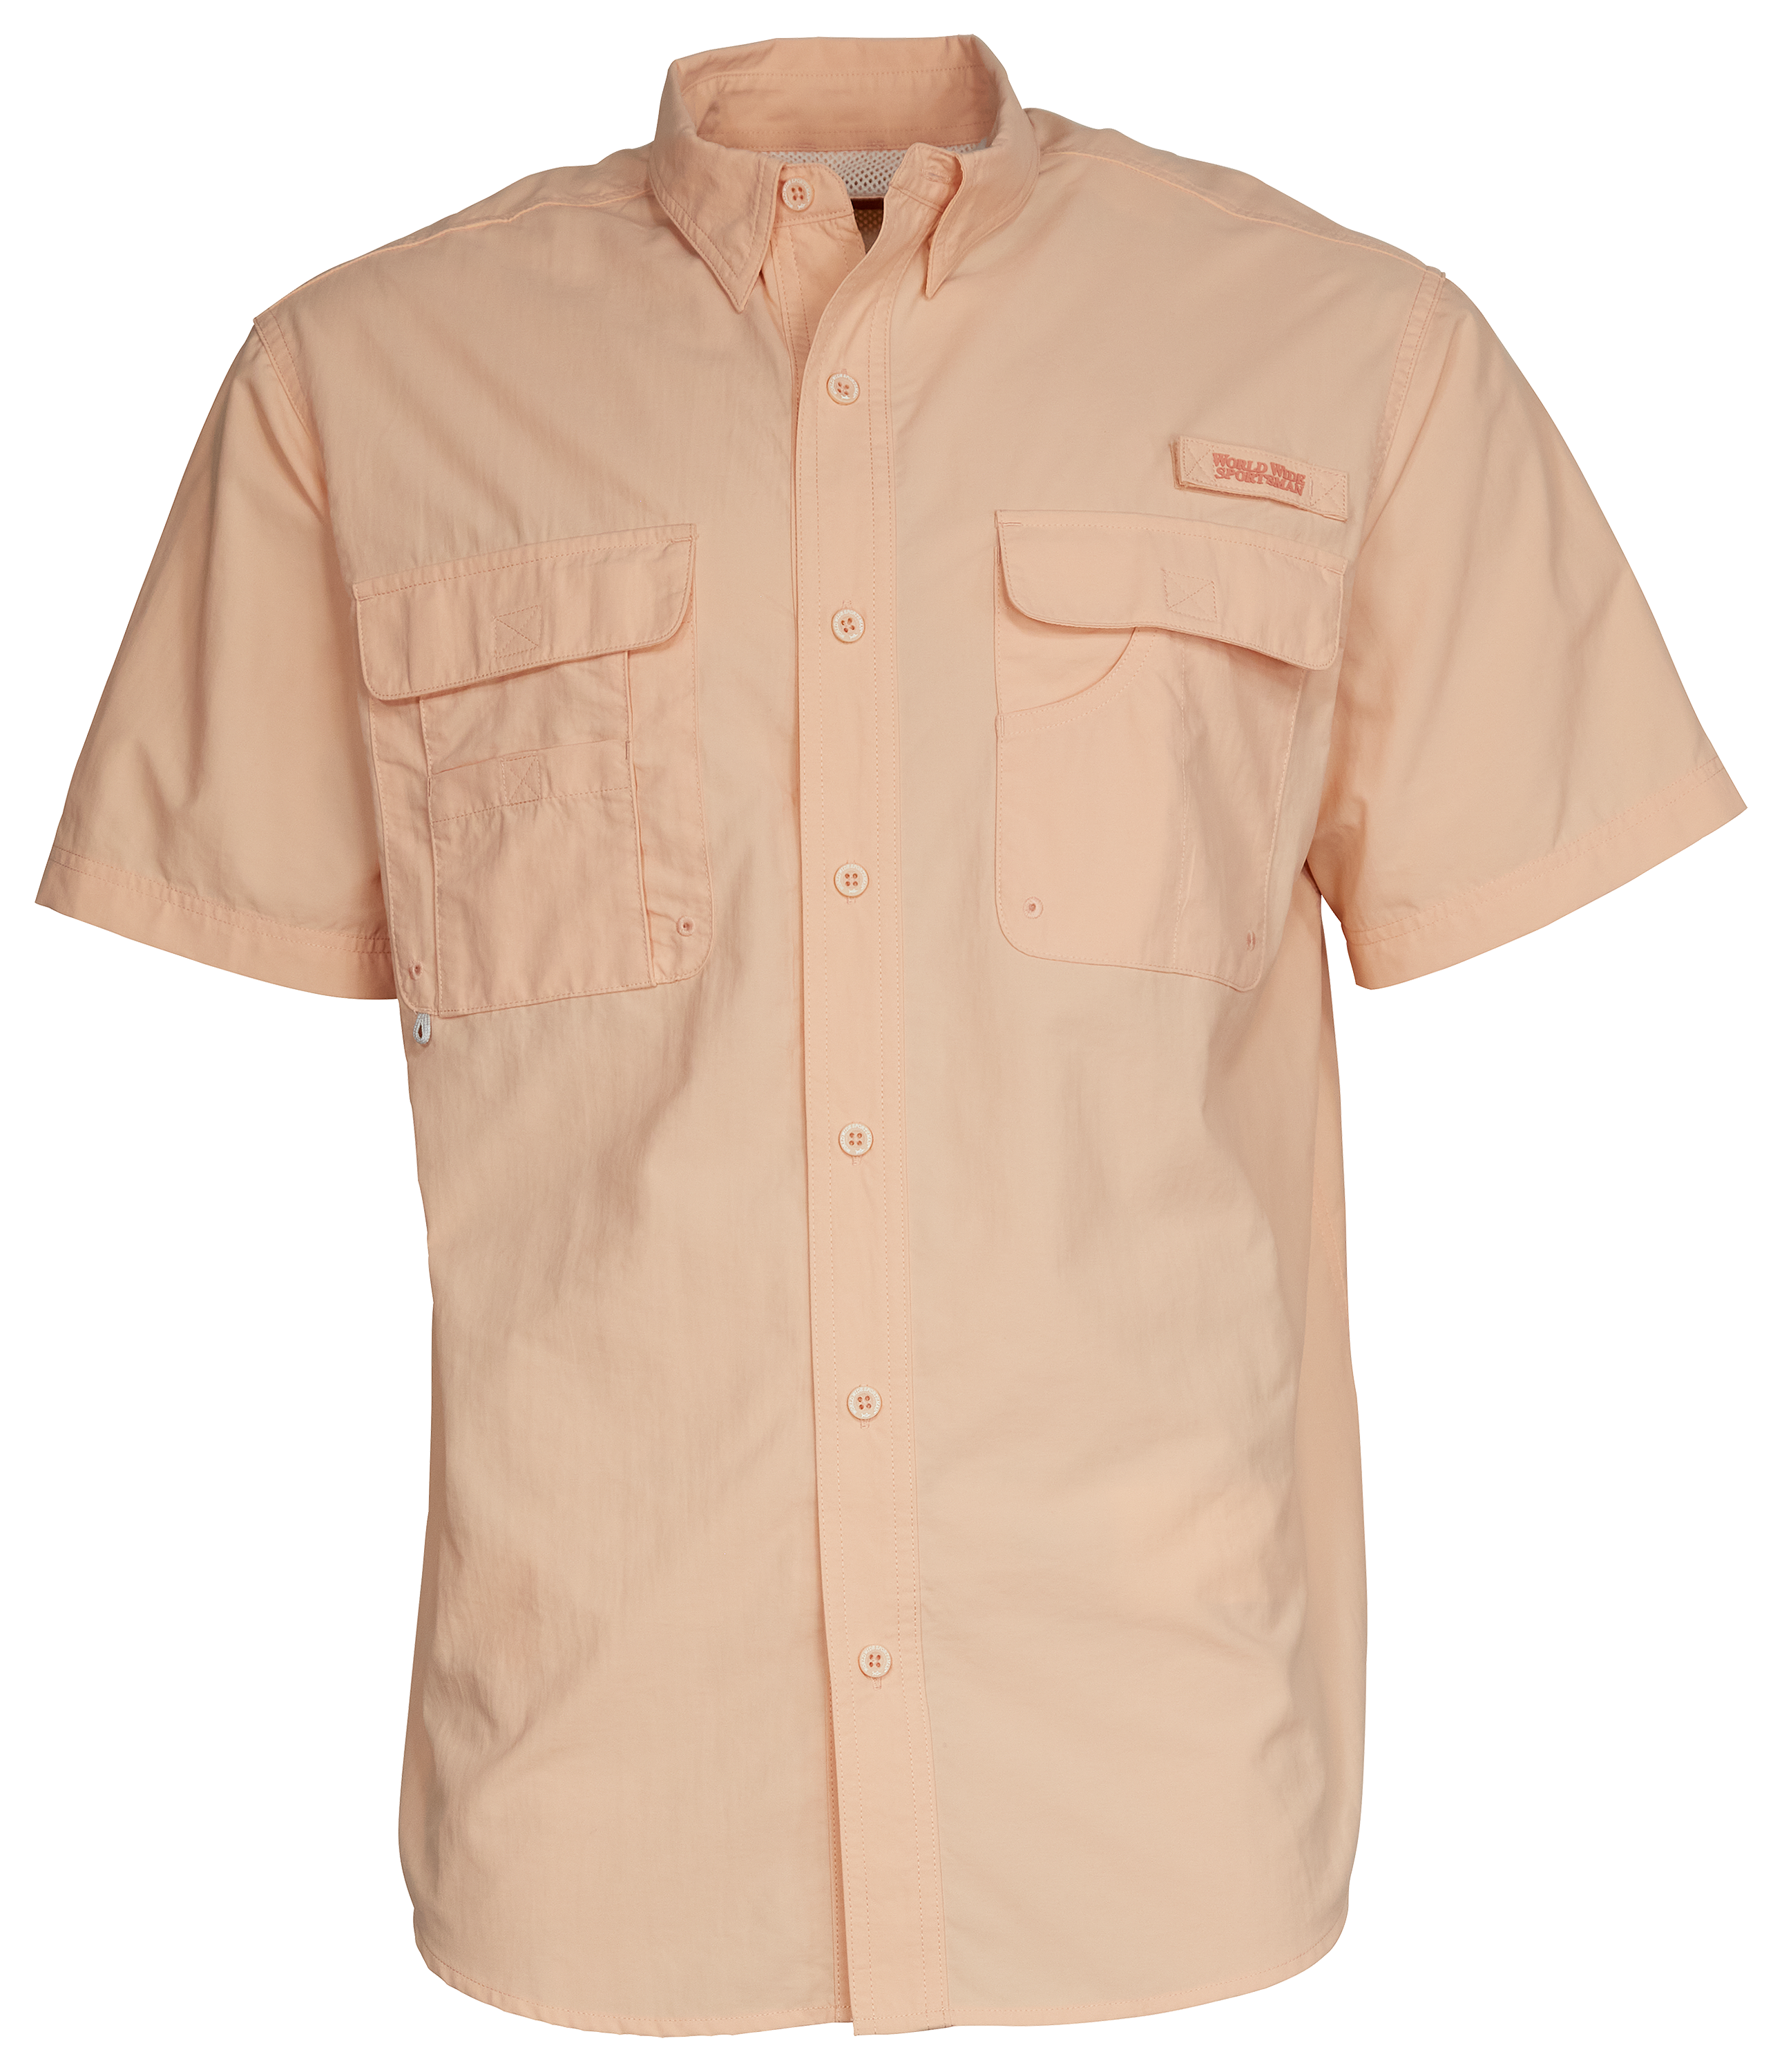 World Wide Sportsman Recycled-Nylon Angler 2.0 Short-Sleeve Button-Down Shirt for Men - Almost Apricot - XL